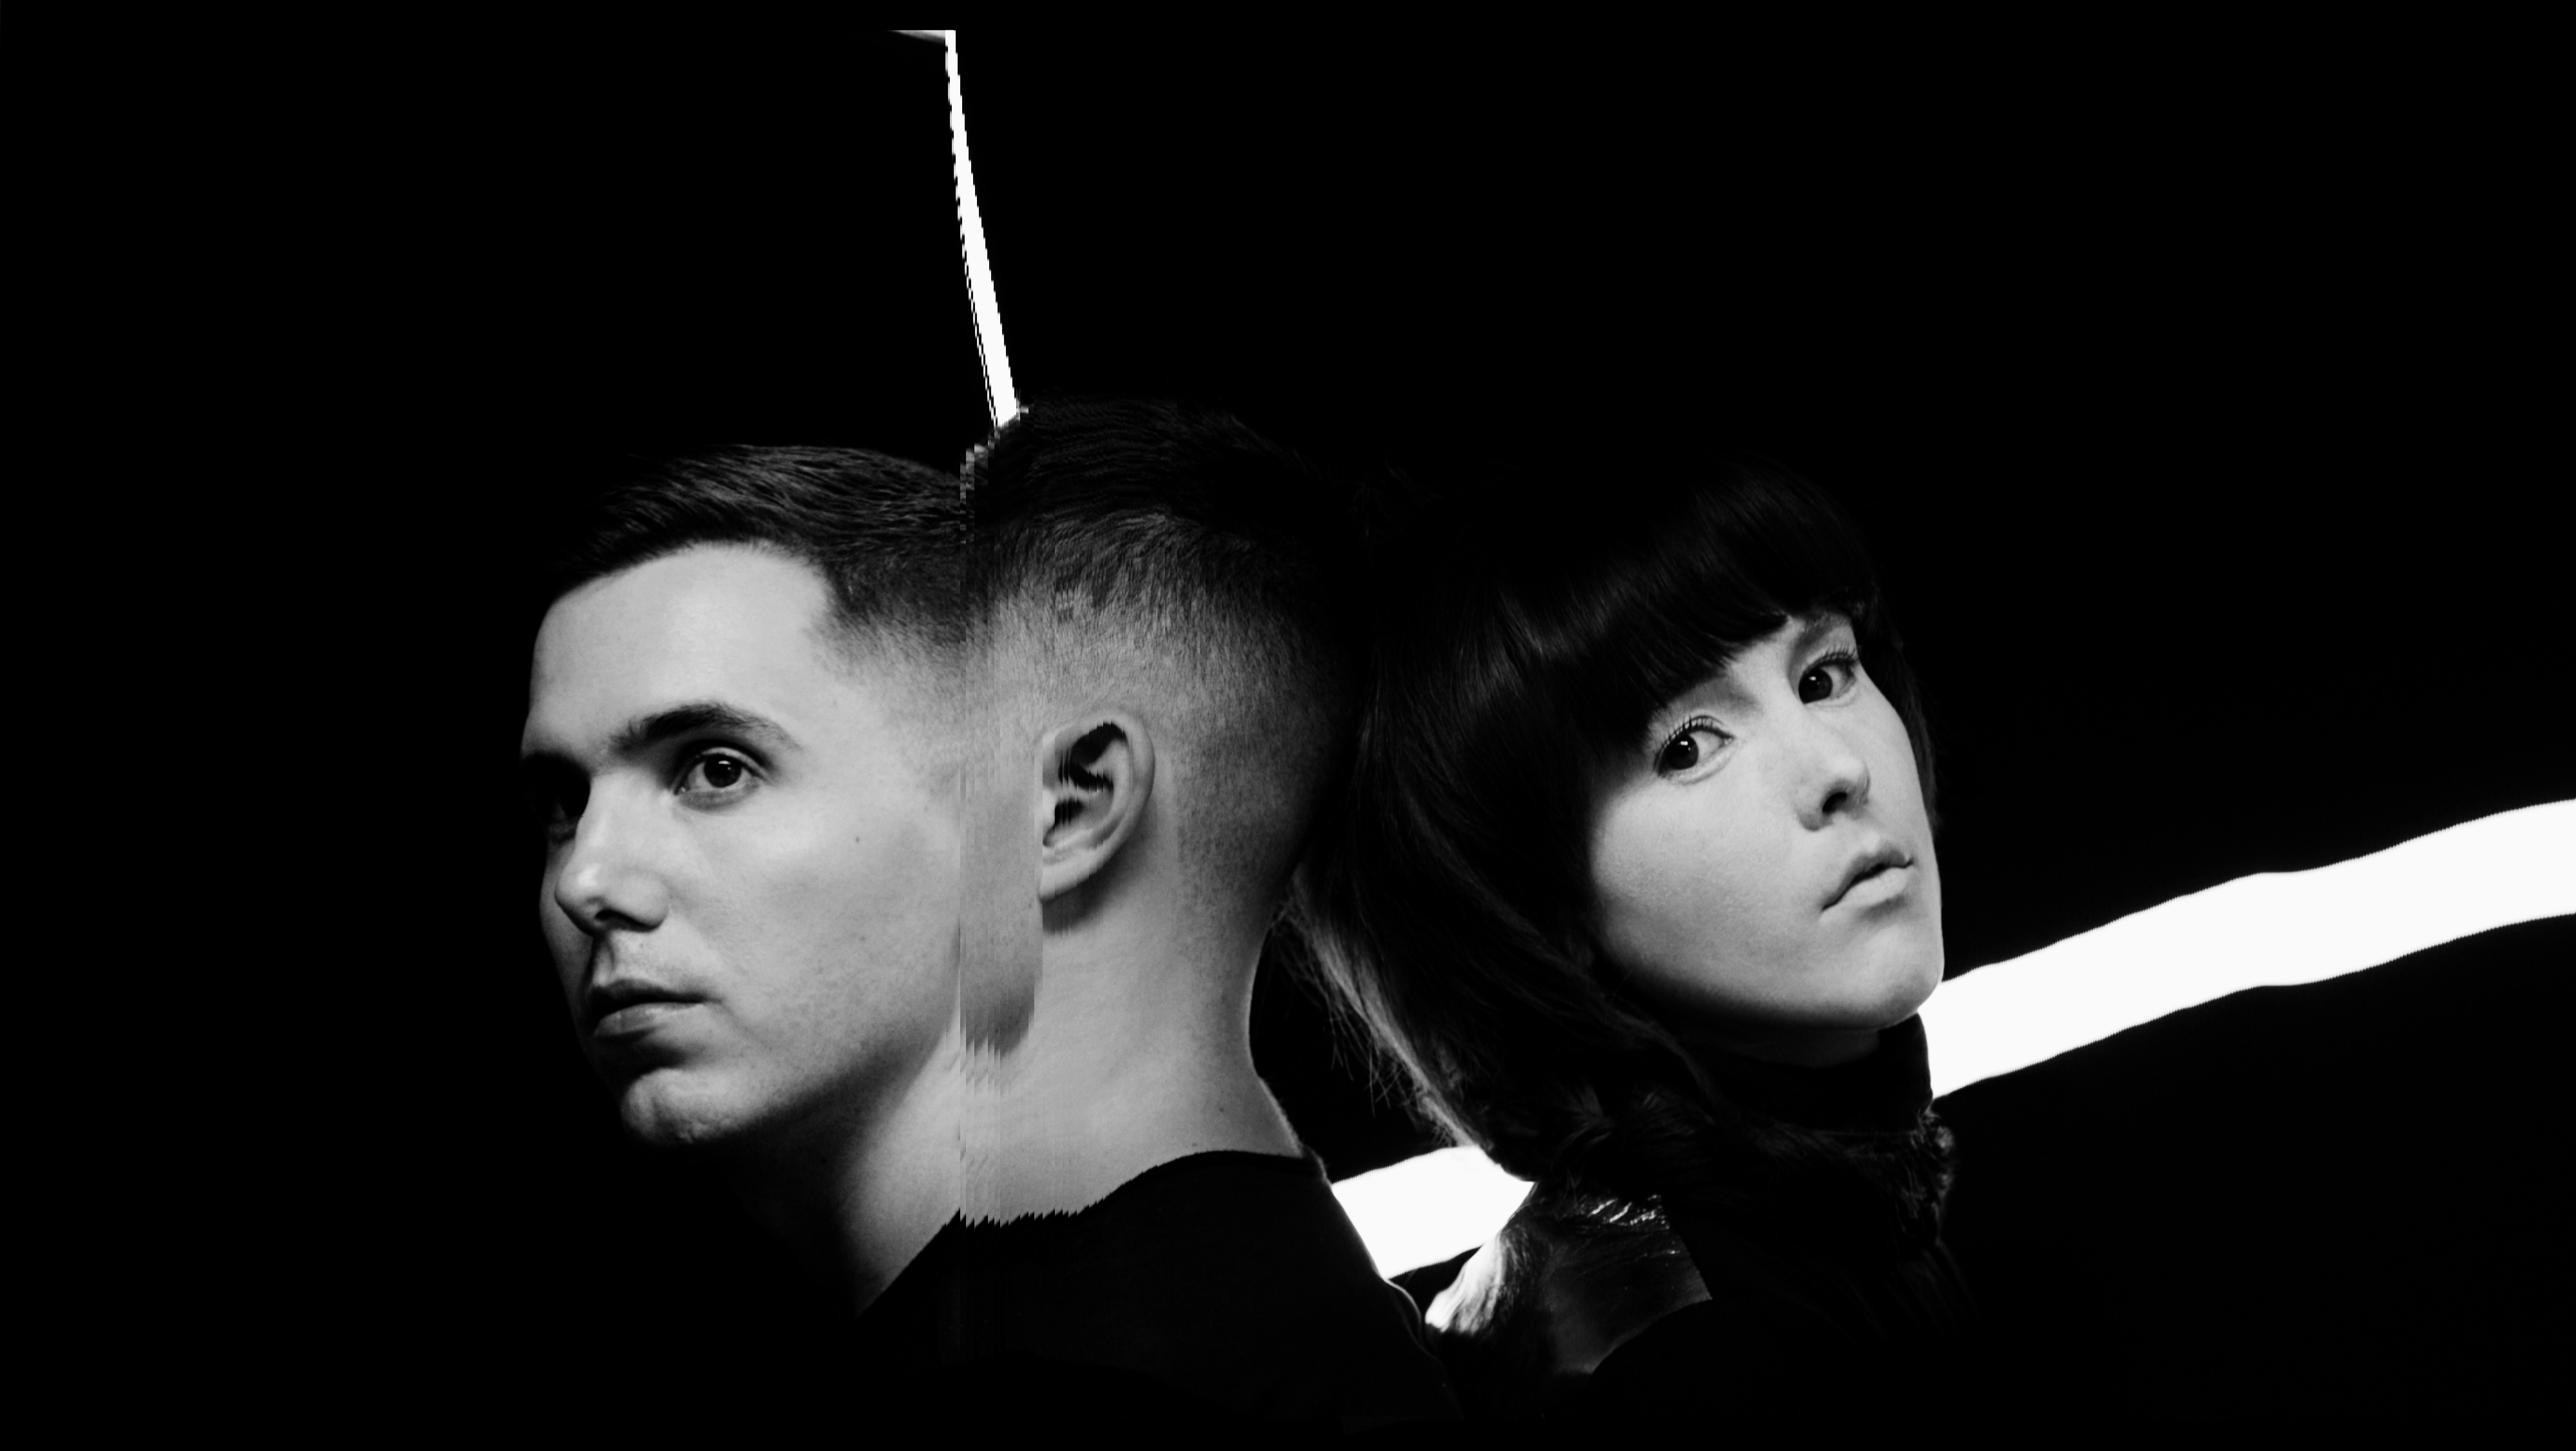 Purity Ring announce new tour dates and share new video for their single "Push Pull." Their album 'Another Eternity.' 